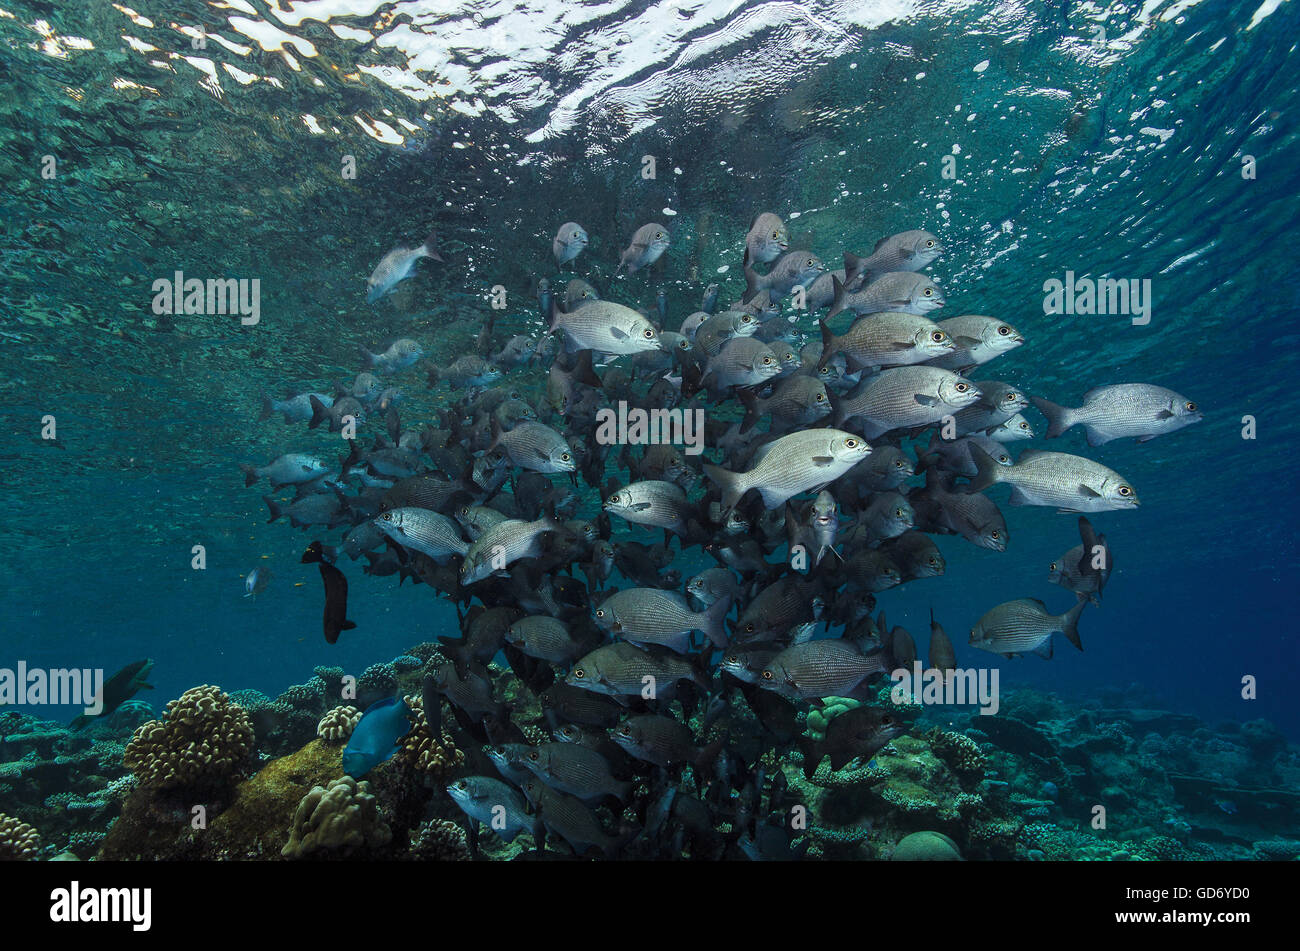 Shoal of Snubnose rudderfish, Kyphosus cinerascens, spawning on top of coral reef, Maldives, Indian Ocean Stock Photo